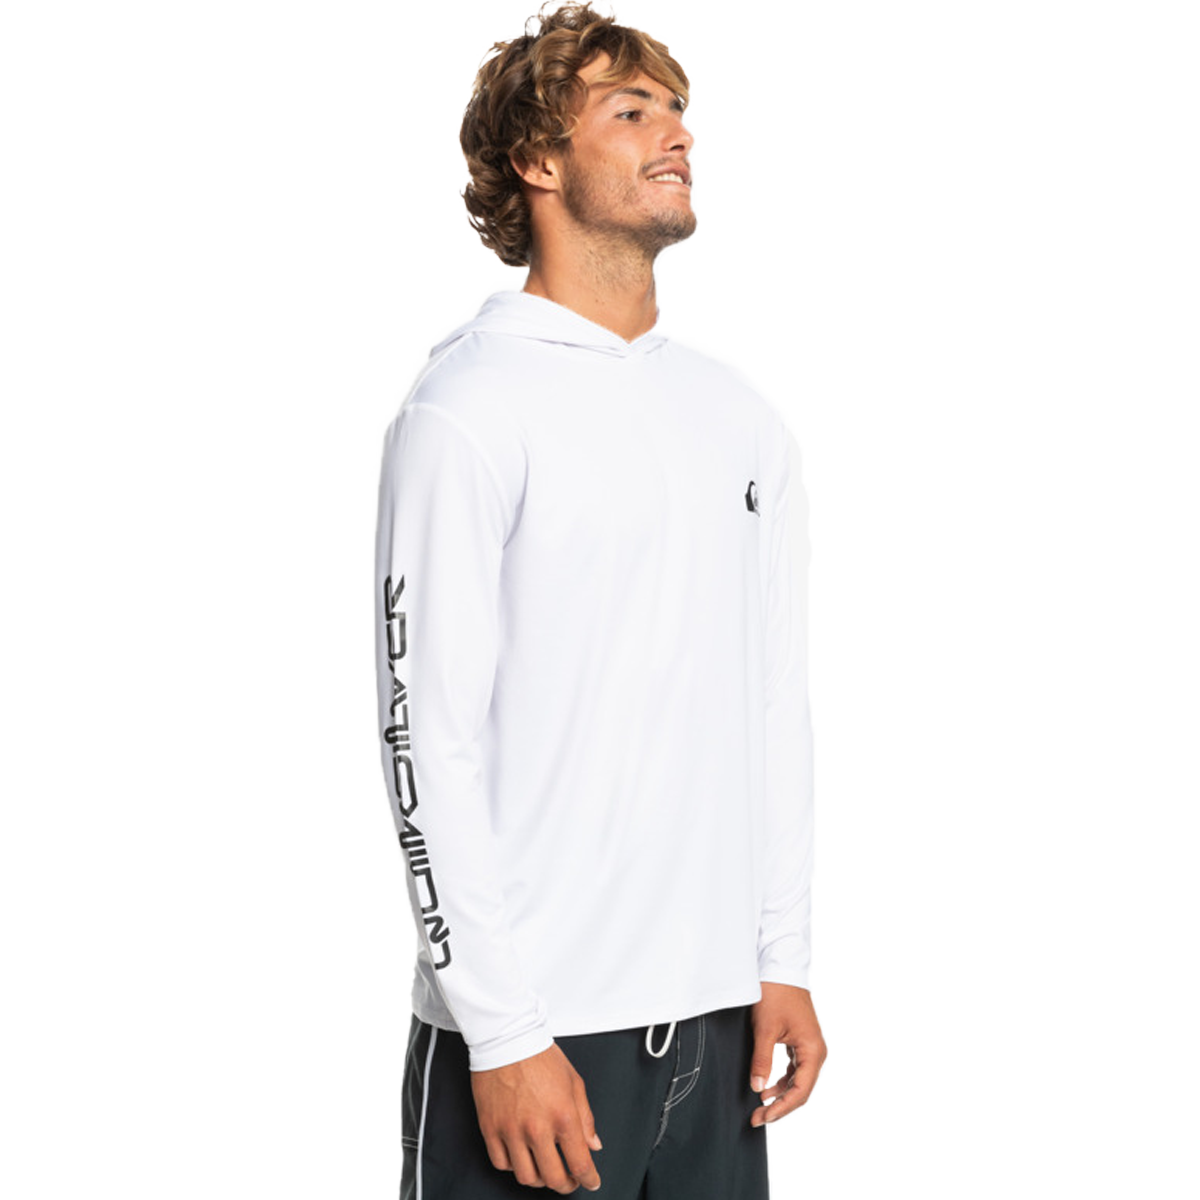 Omni Session Hooded Long Sleeve alternate view